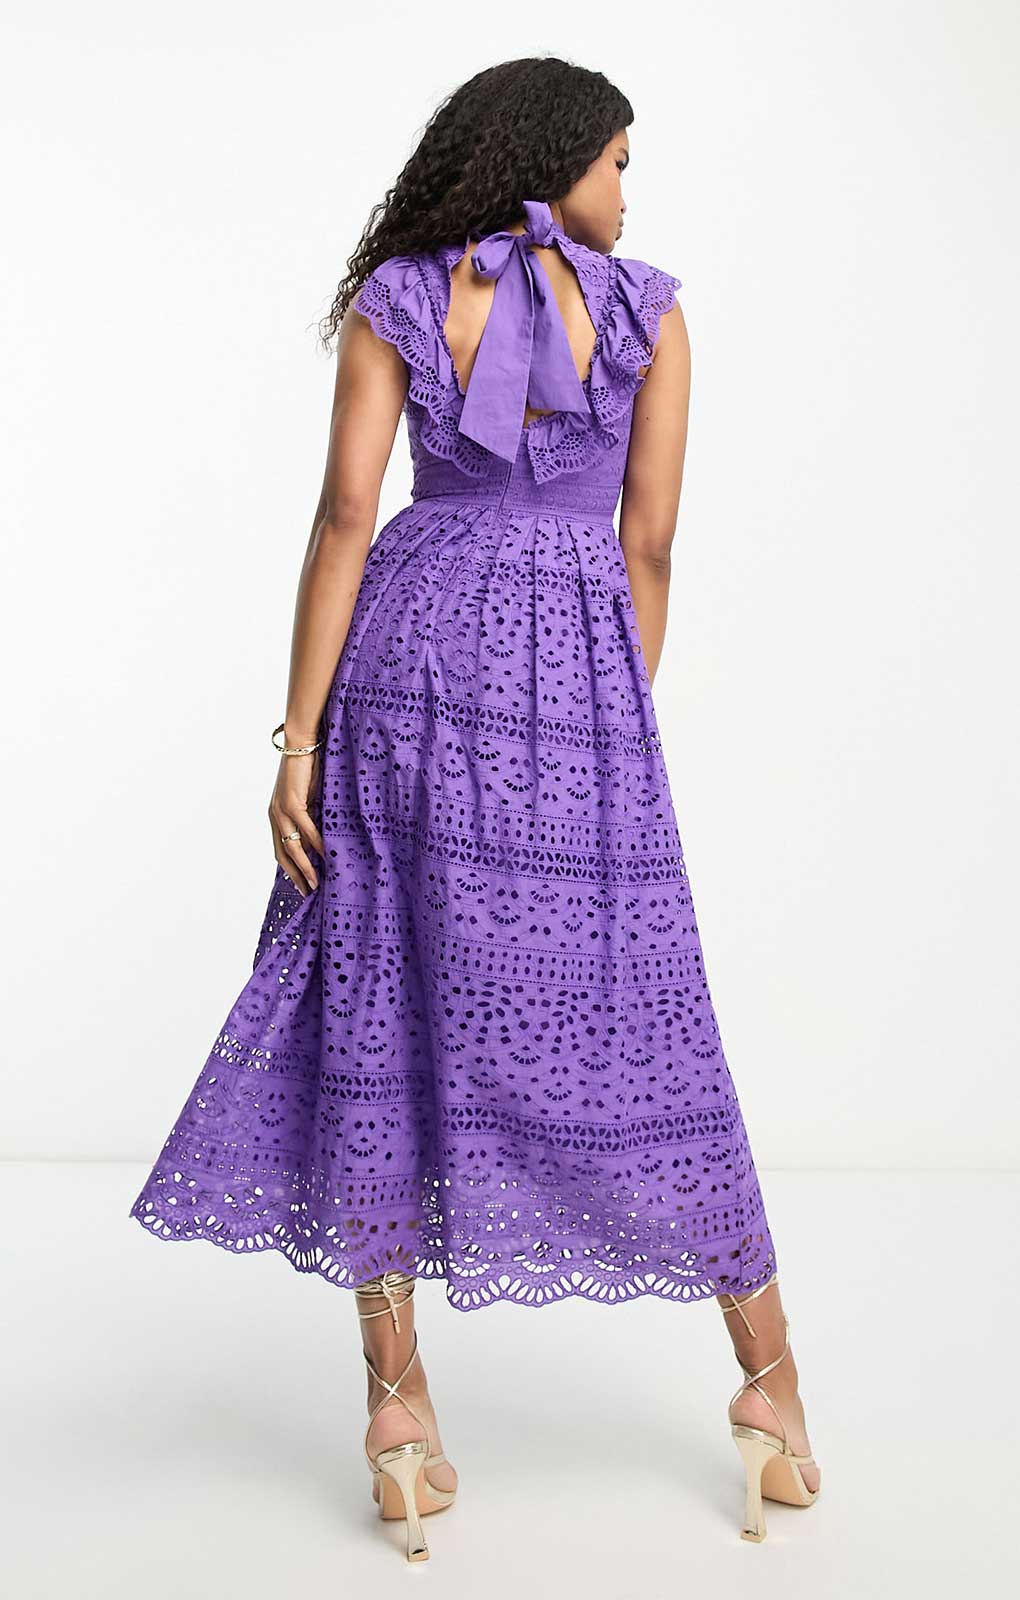 Asos Design Lace Midi Dress With Bow Back Detail In Purple product image